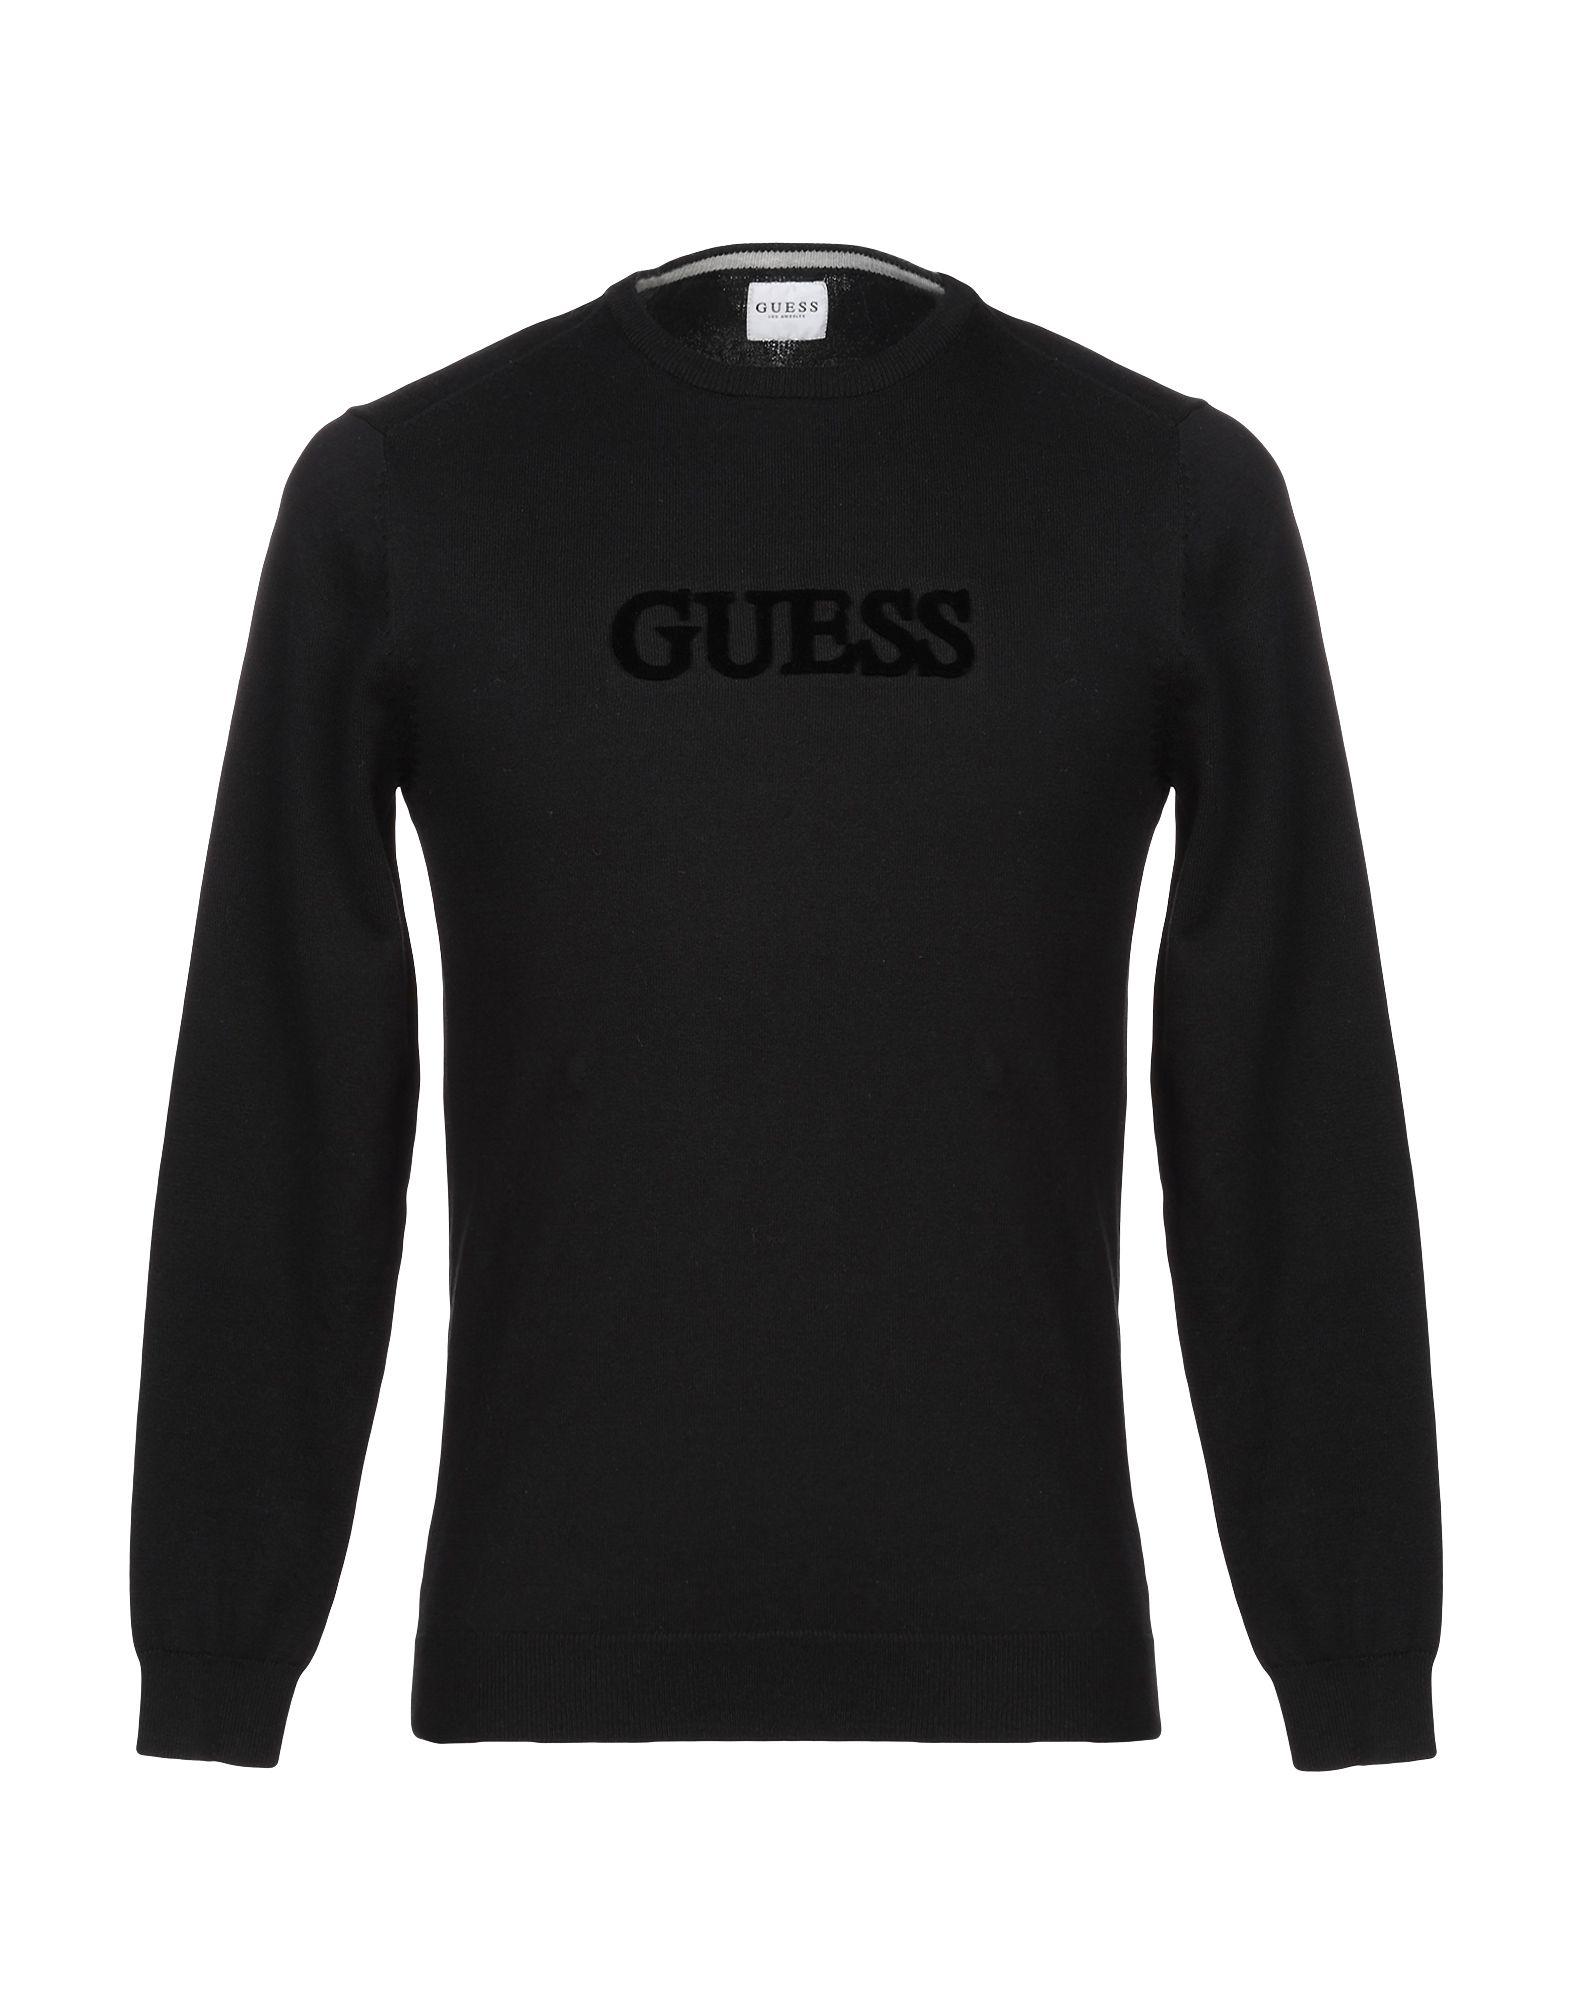 Guess Synthetic Sweater in Black for Men - Lyst